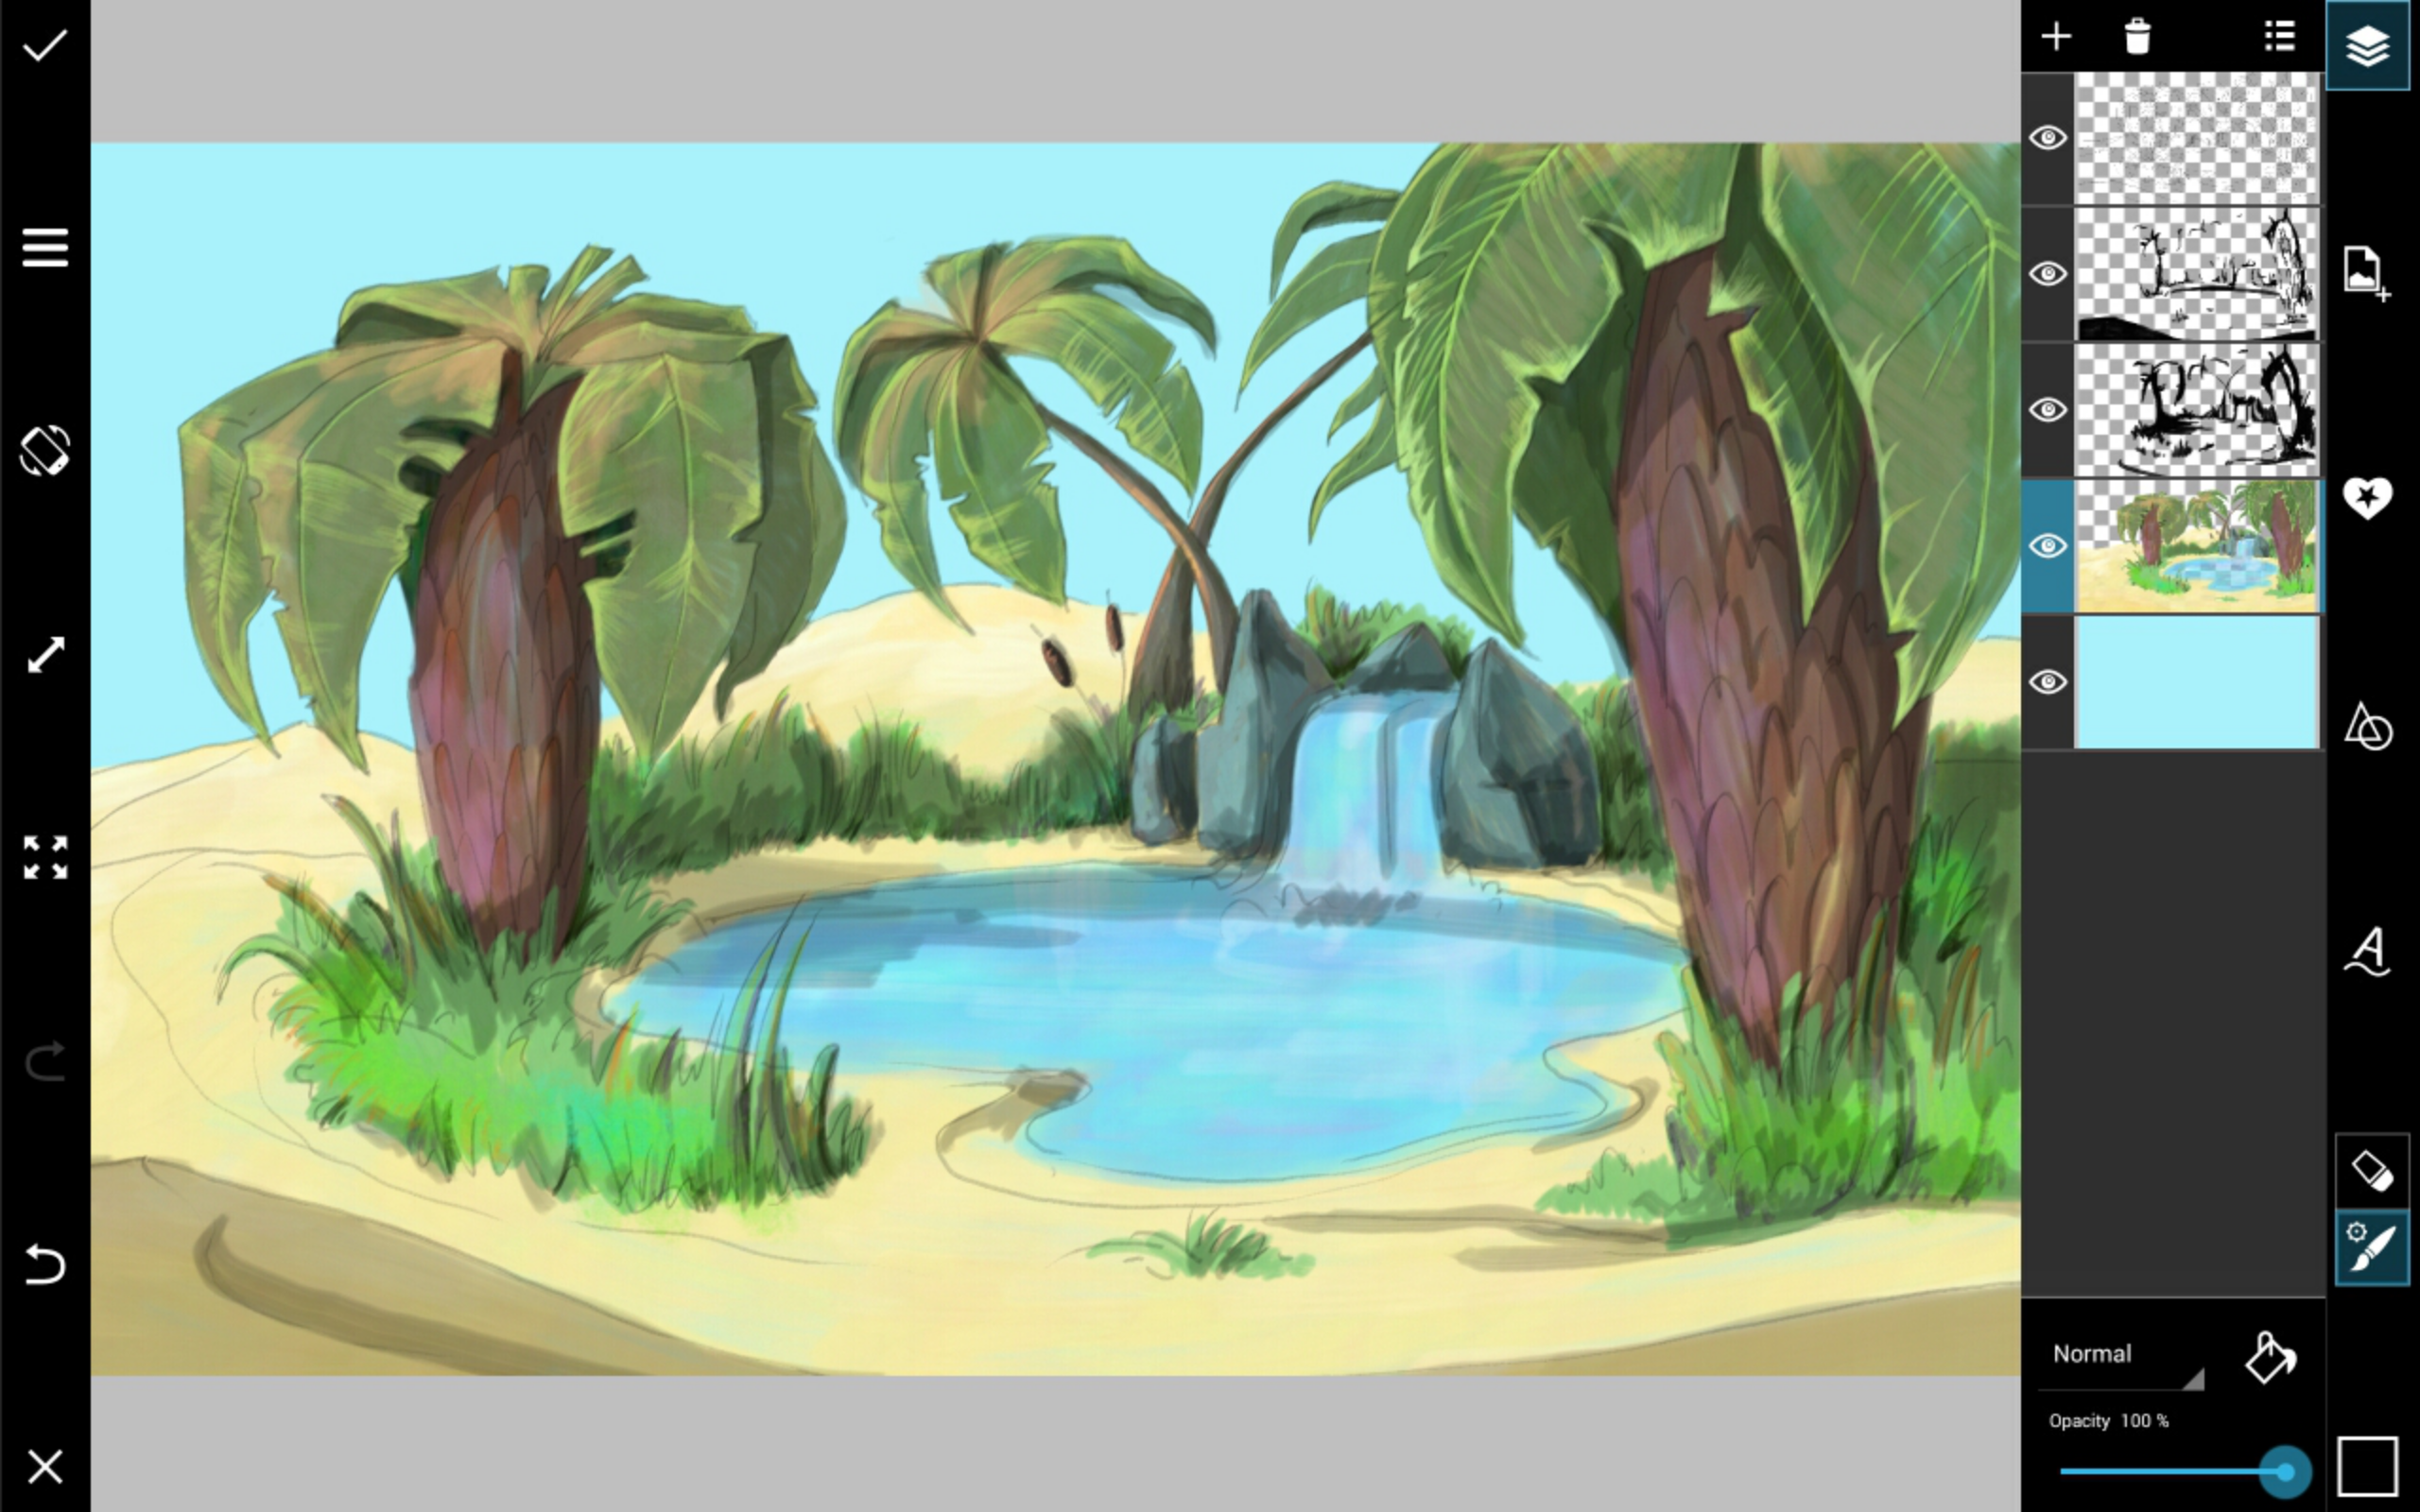 Drawing Tutorial: How to Use PicsArt to Draw a Desert Oasis - Create